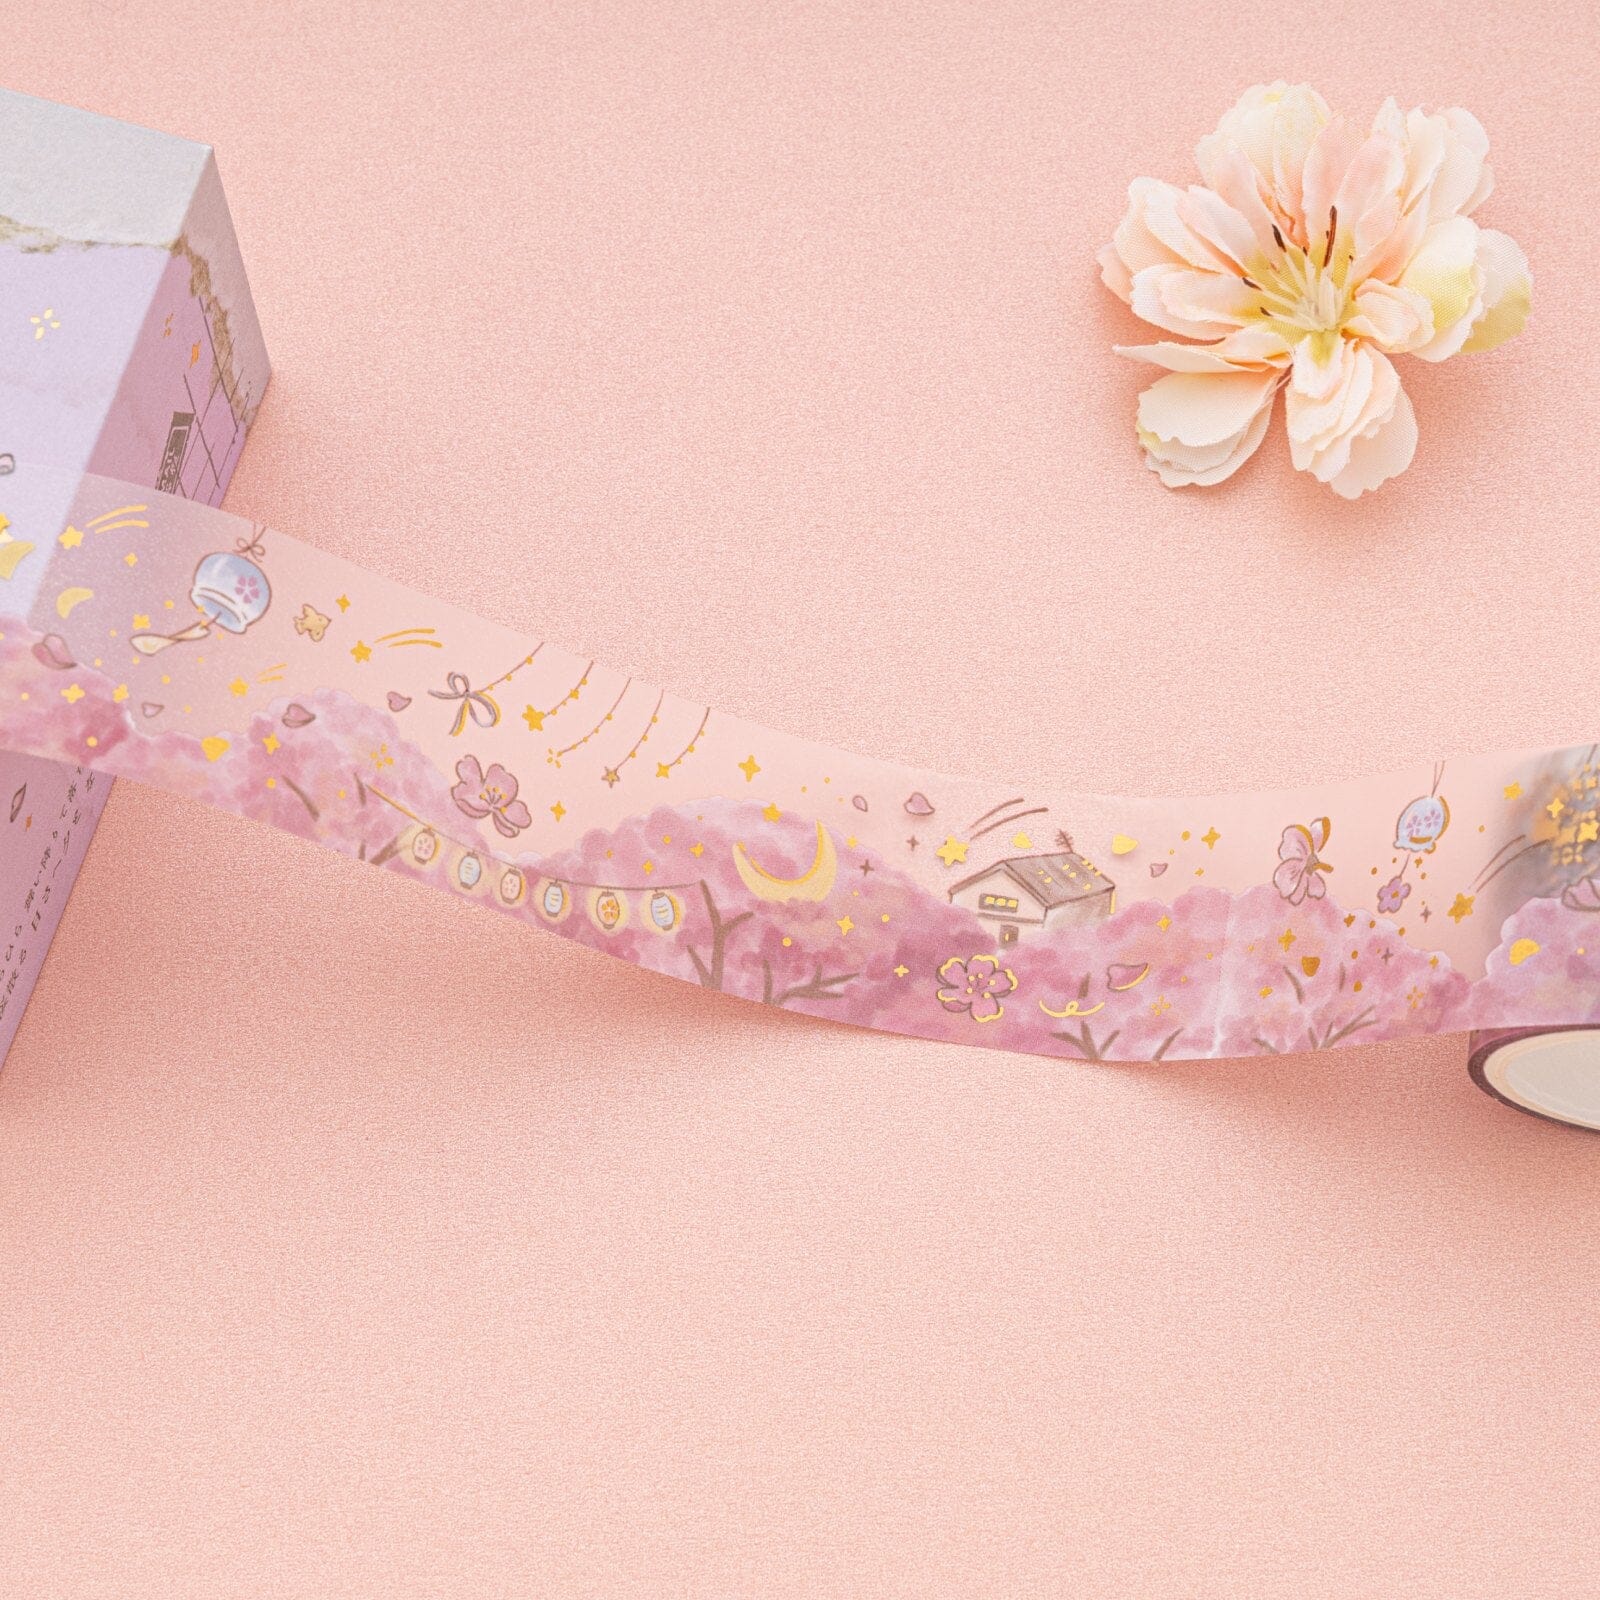 Starry Skies & Cherry blossoms Washi Tape set Japanese Stationery – The  Pink Room Co.